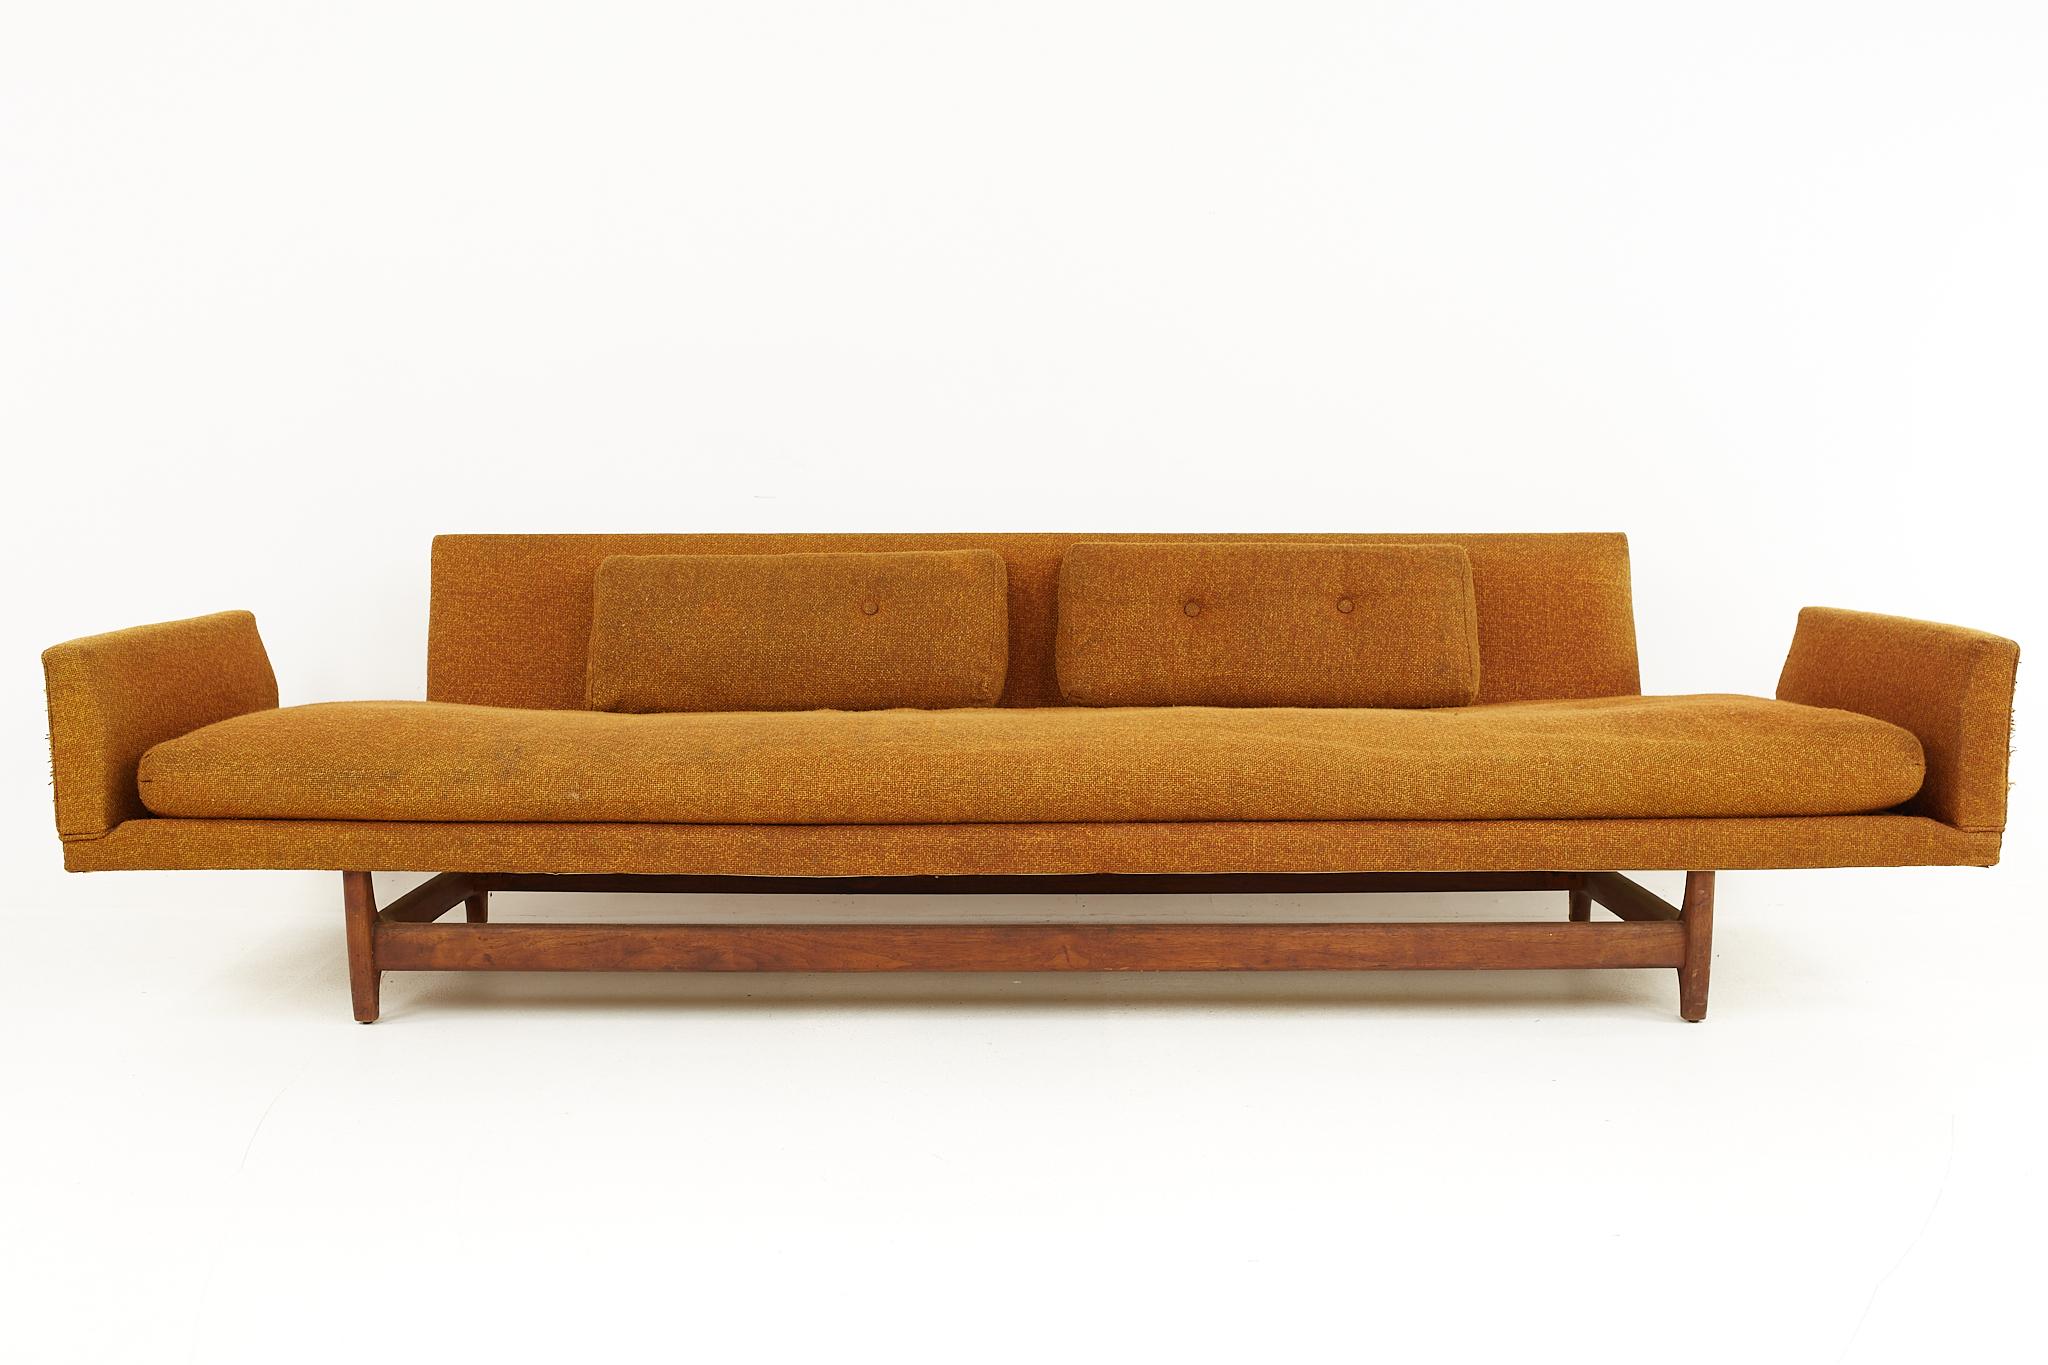 Adrian Pearsall for Craft Associates style mid century Gondola sofa

This sofa measures: 106 wide x 29 deep x 26 inches high, with a seat height of 16 and arm height of 21 inches

Ready for new upholstery. This service is available for an